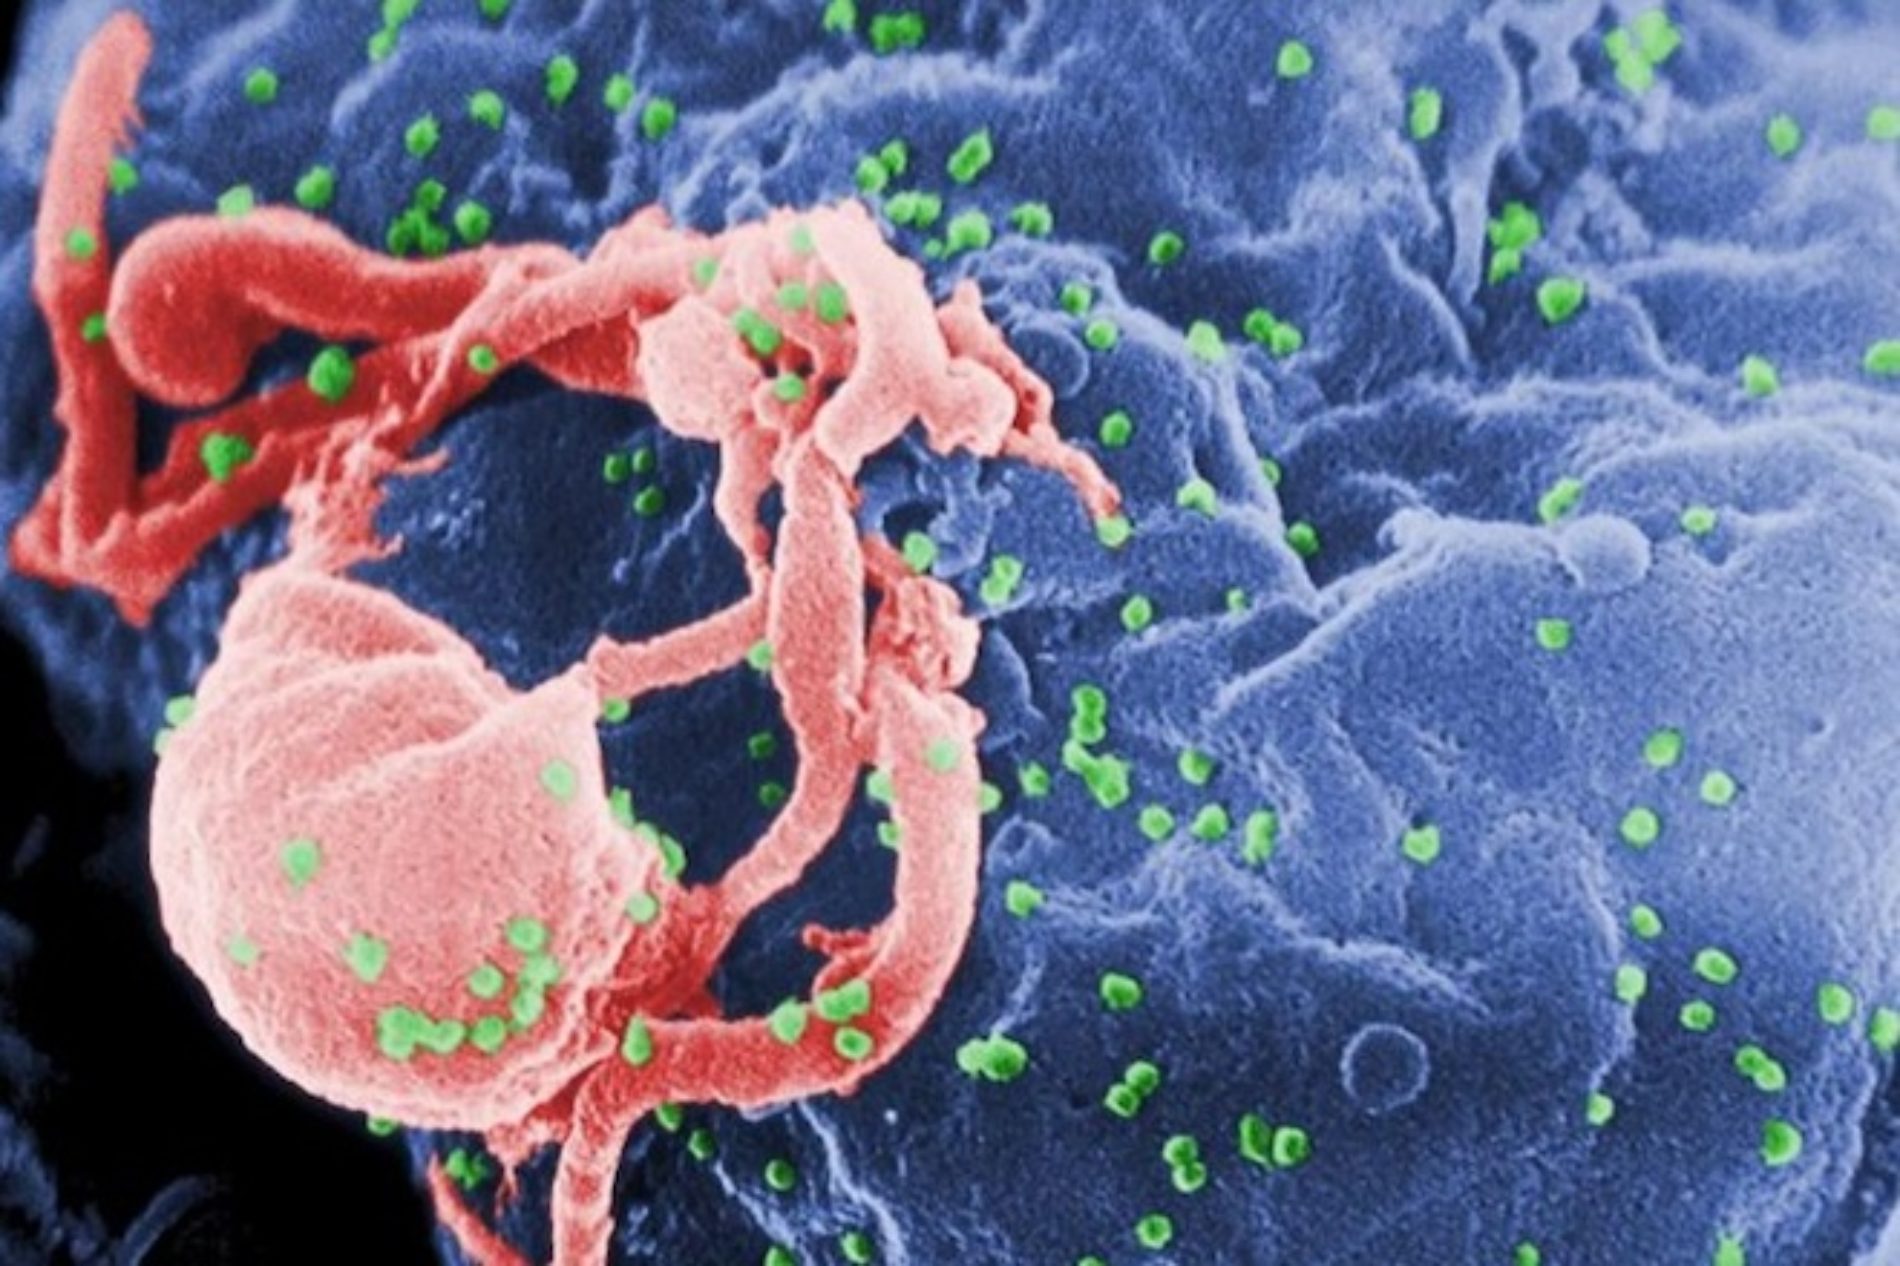 Potent New Antibody Against HIV Discovered